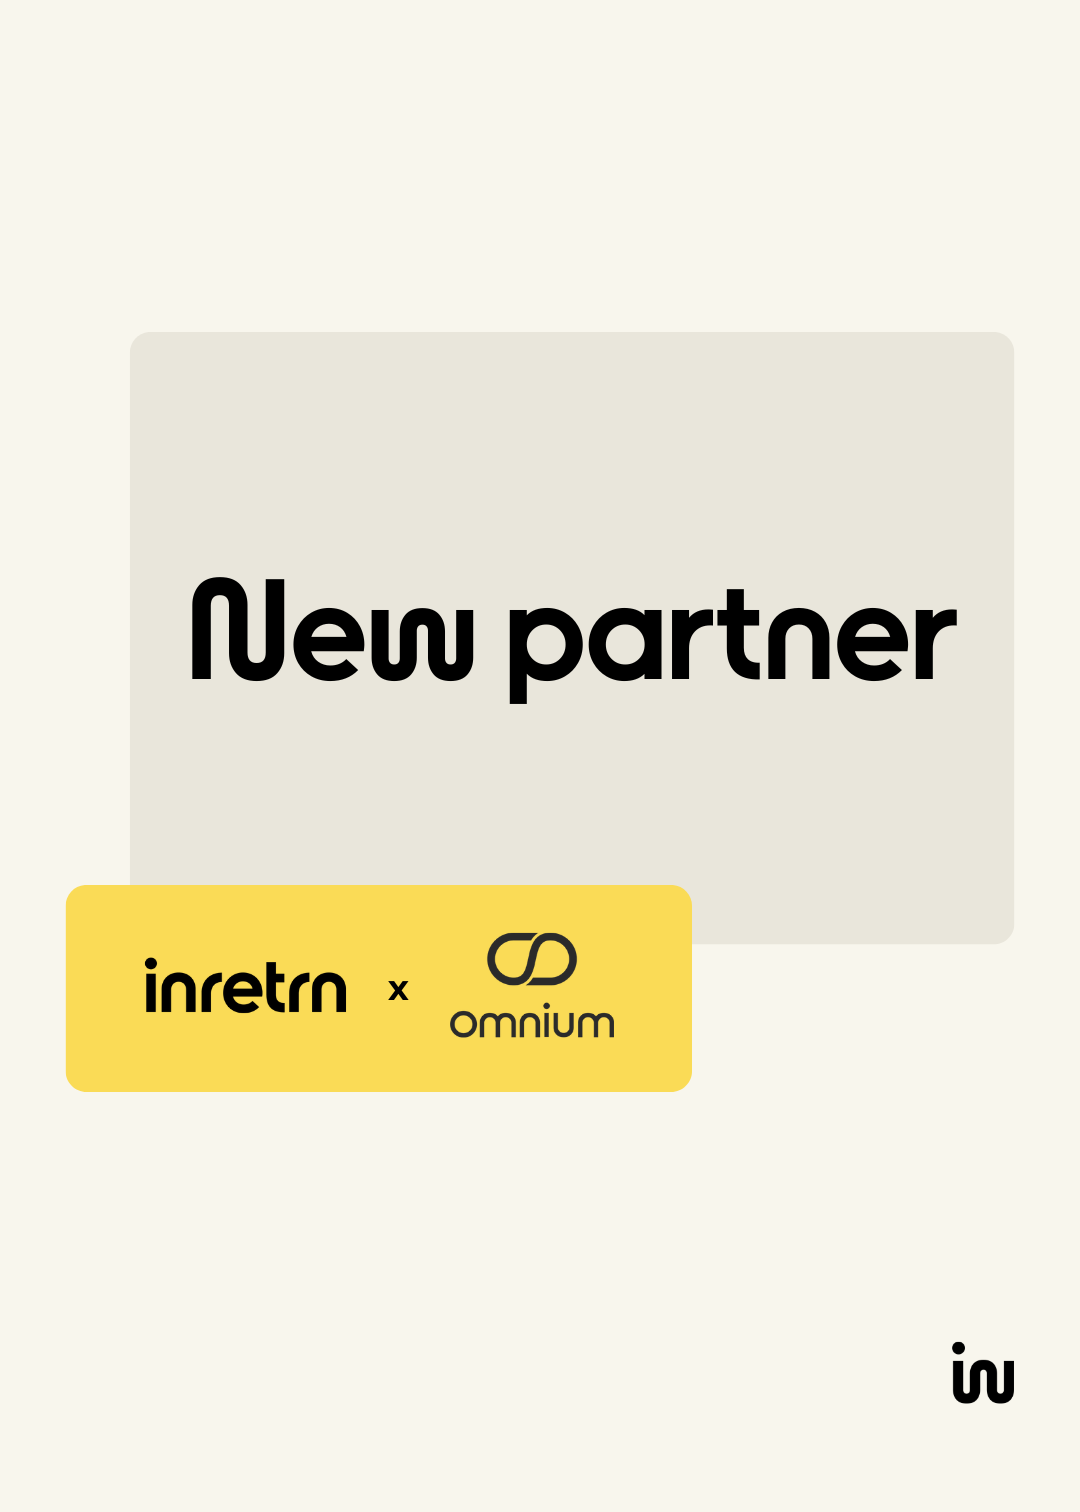 Inretrn partners with omnium to offer tailored solutions in the nordic market